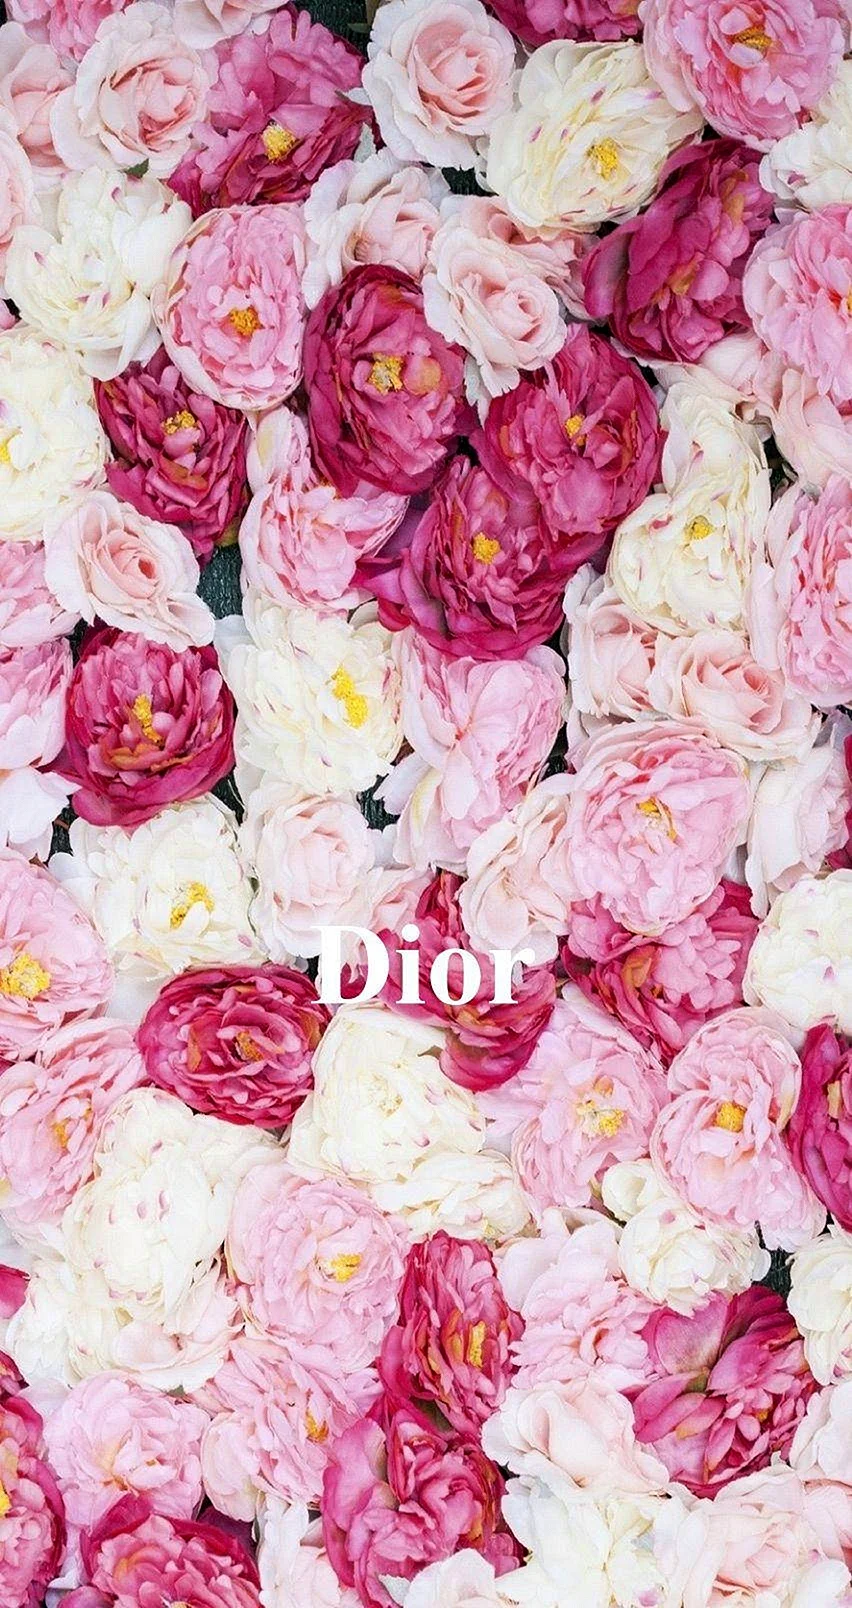 Dior iPhone Wallpaper For iPhone